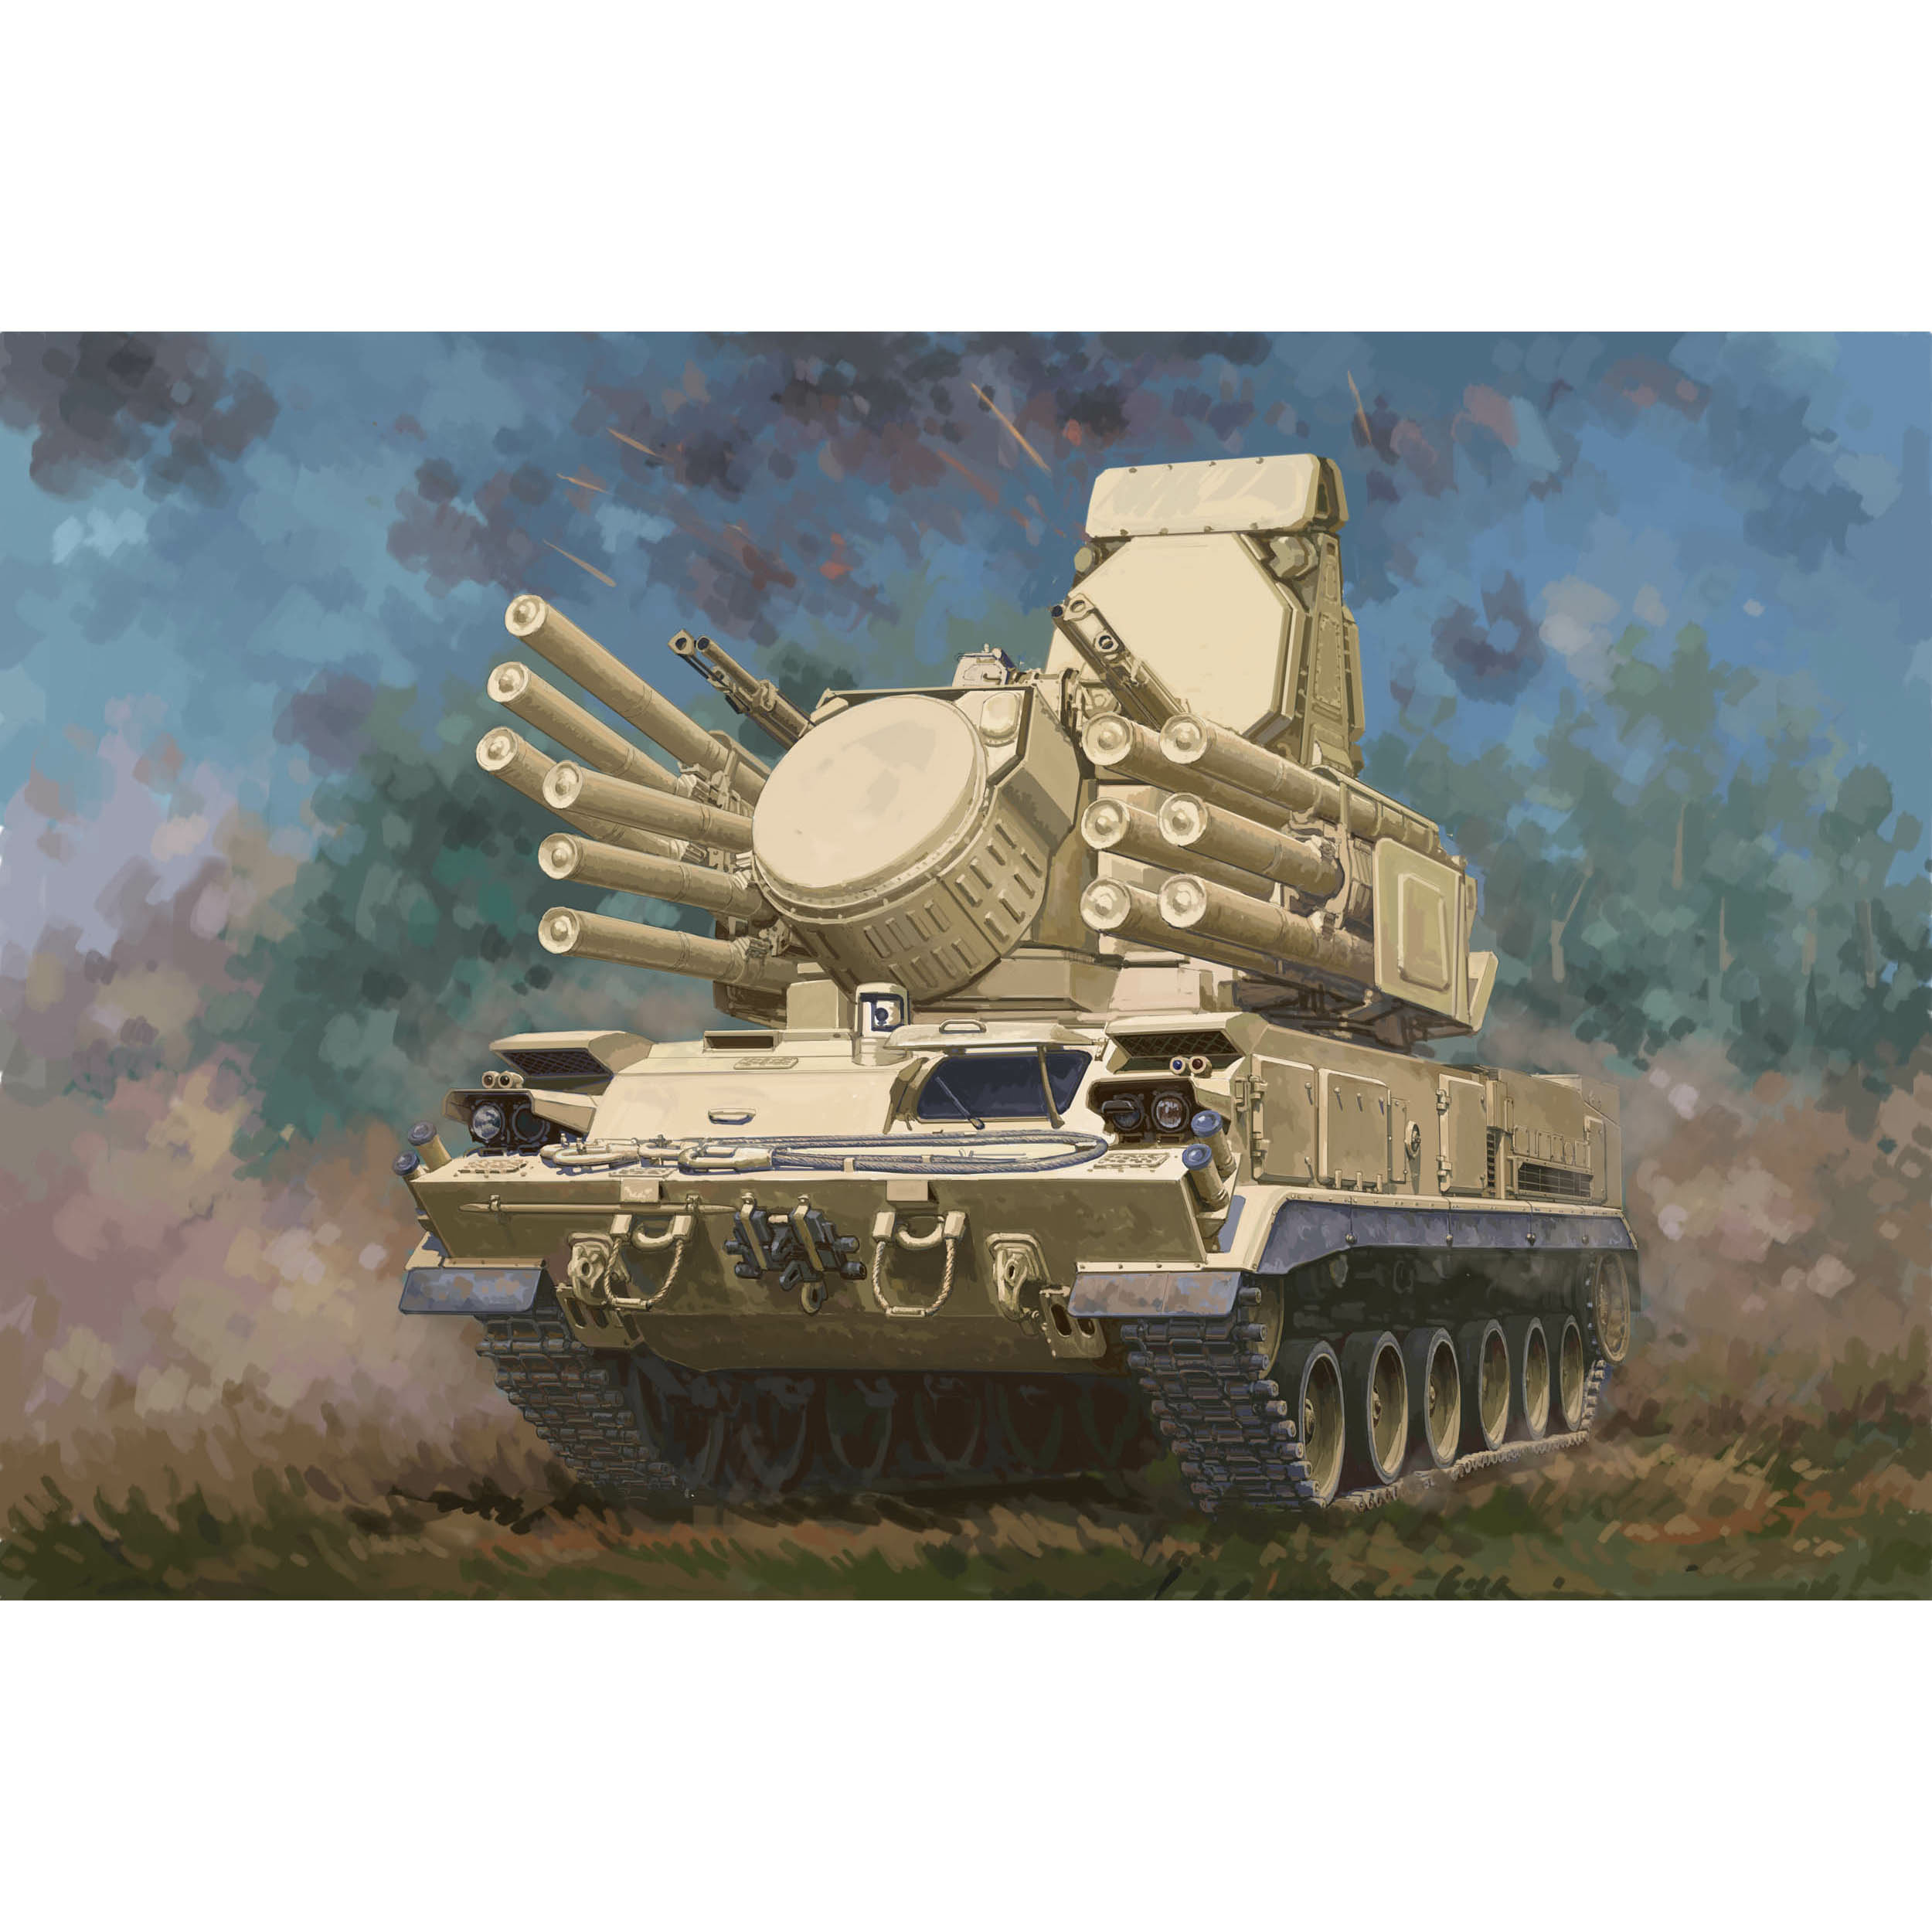 01093 Trumpeter 1/35 Anti-aircraft missile gun complex DB 96K6-S1 (on tracked chassis)